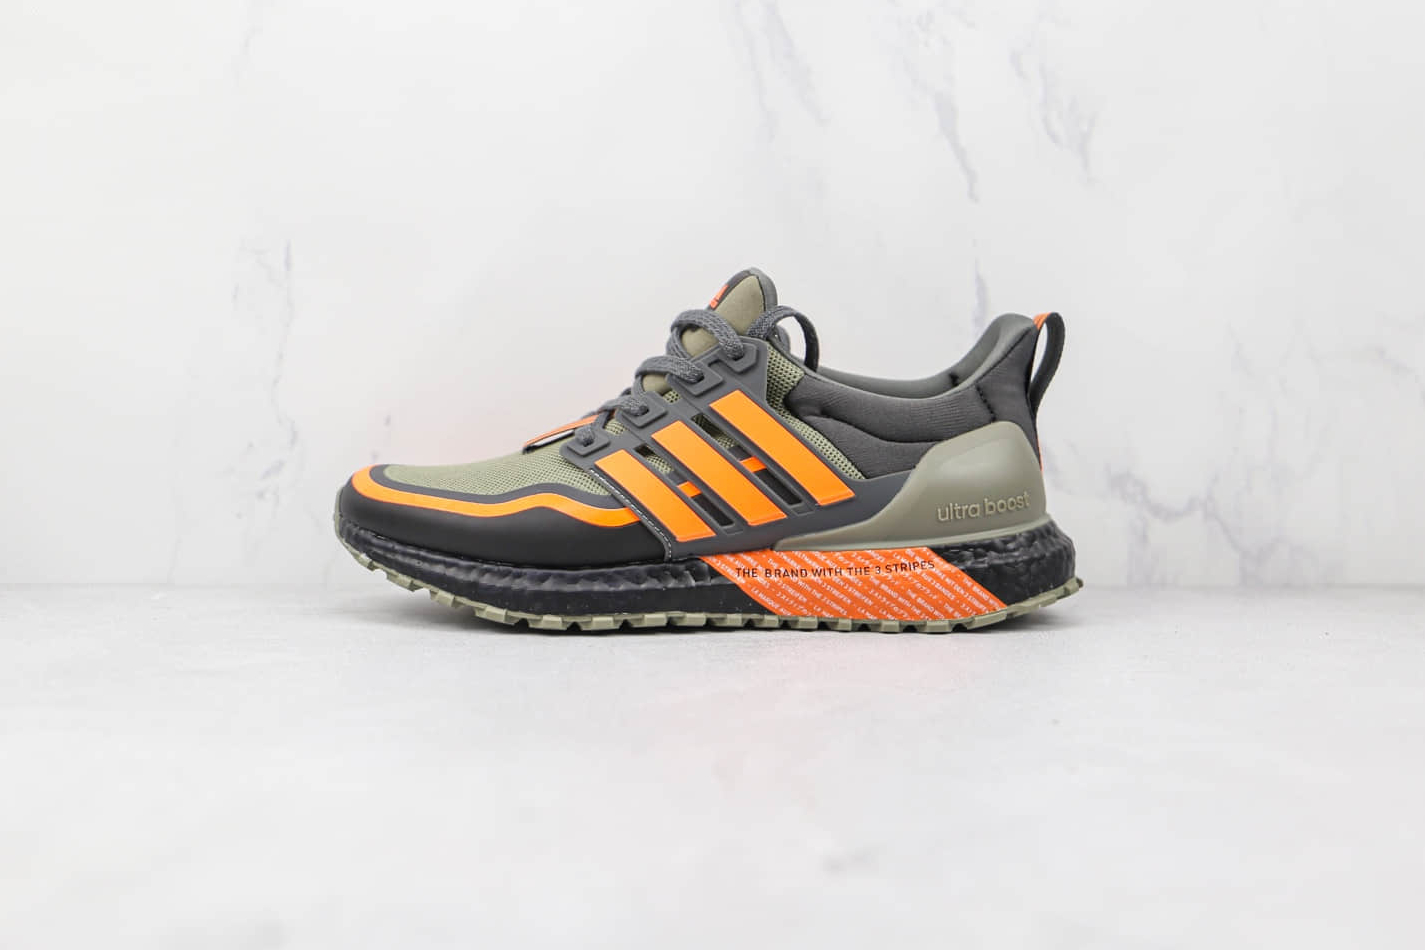 Adidas Ultraboost All Terrain H67359 - Ultimate Performance and Style